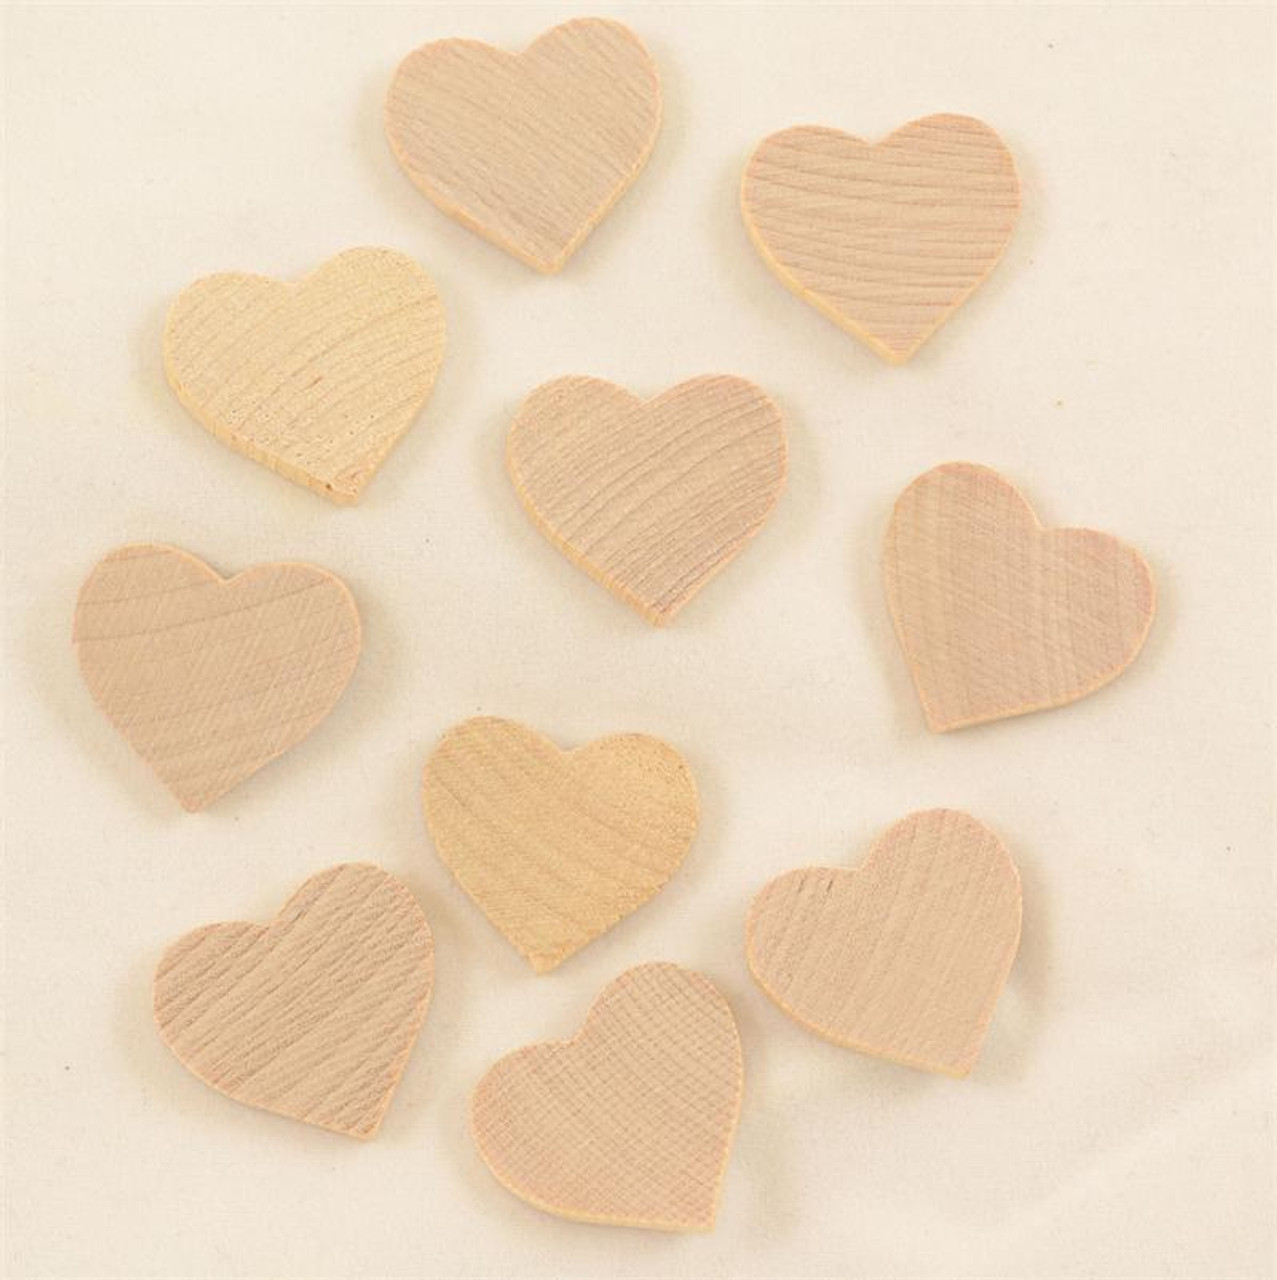 Solid Hardwood Heart 1 x 1/8 inch Thick / Package of 10